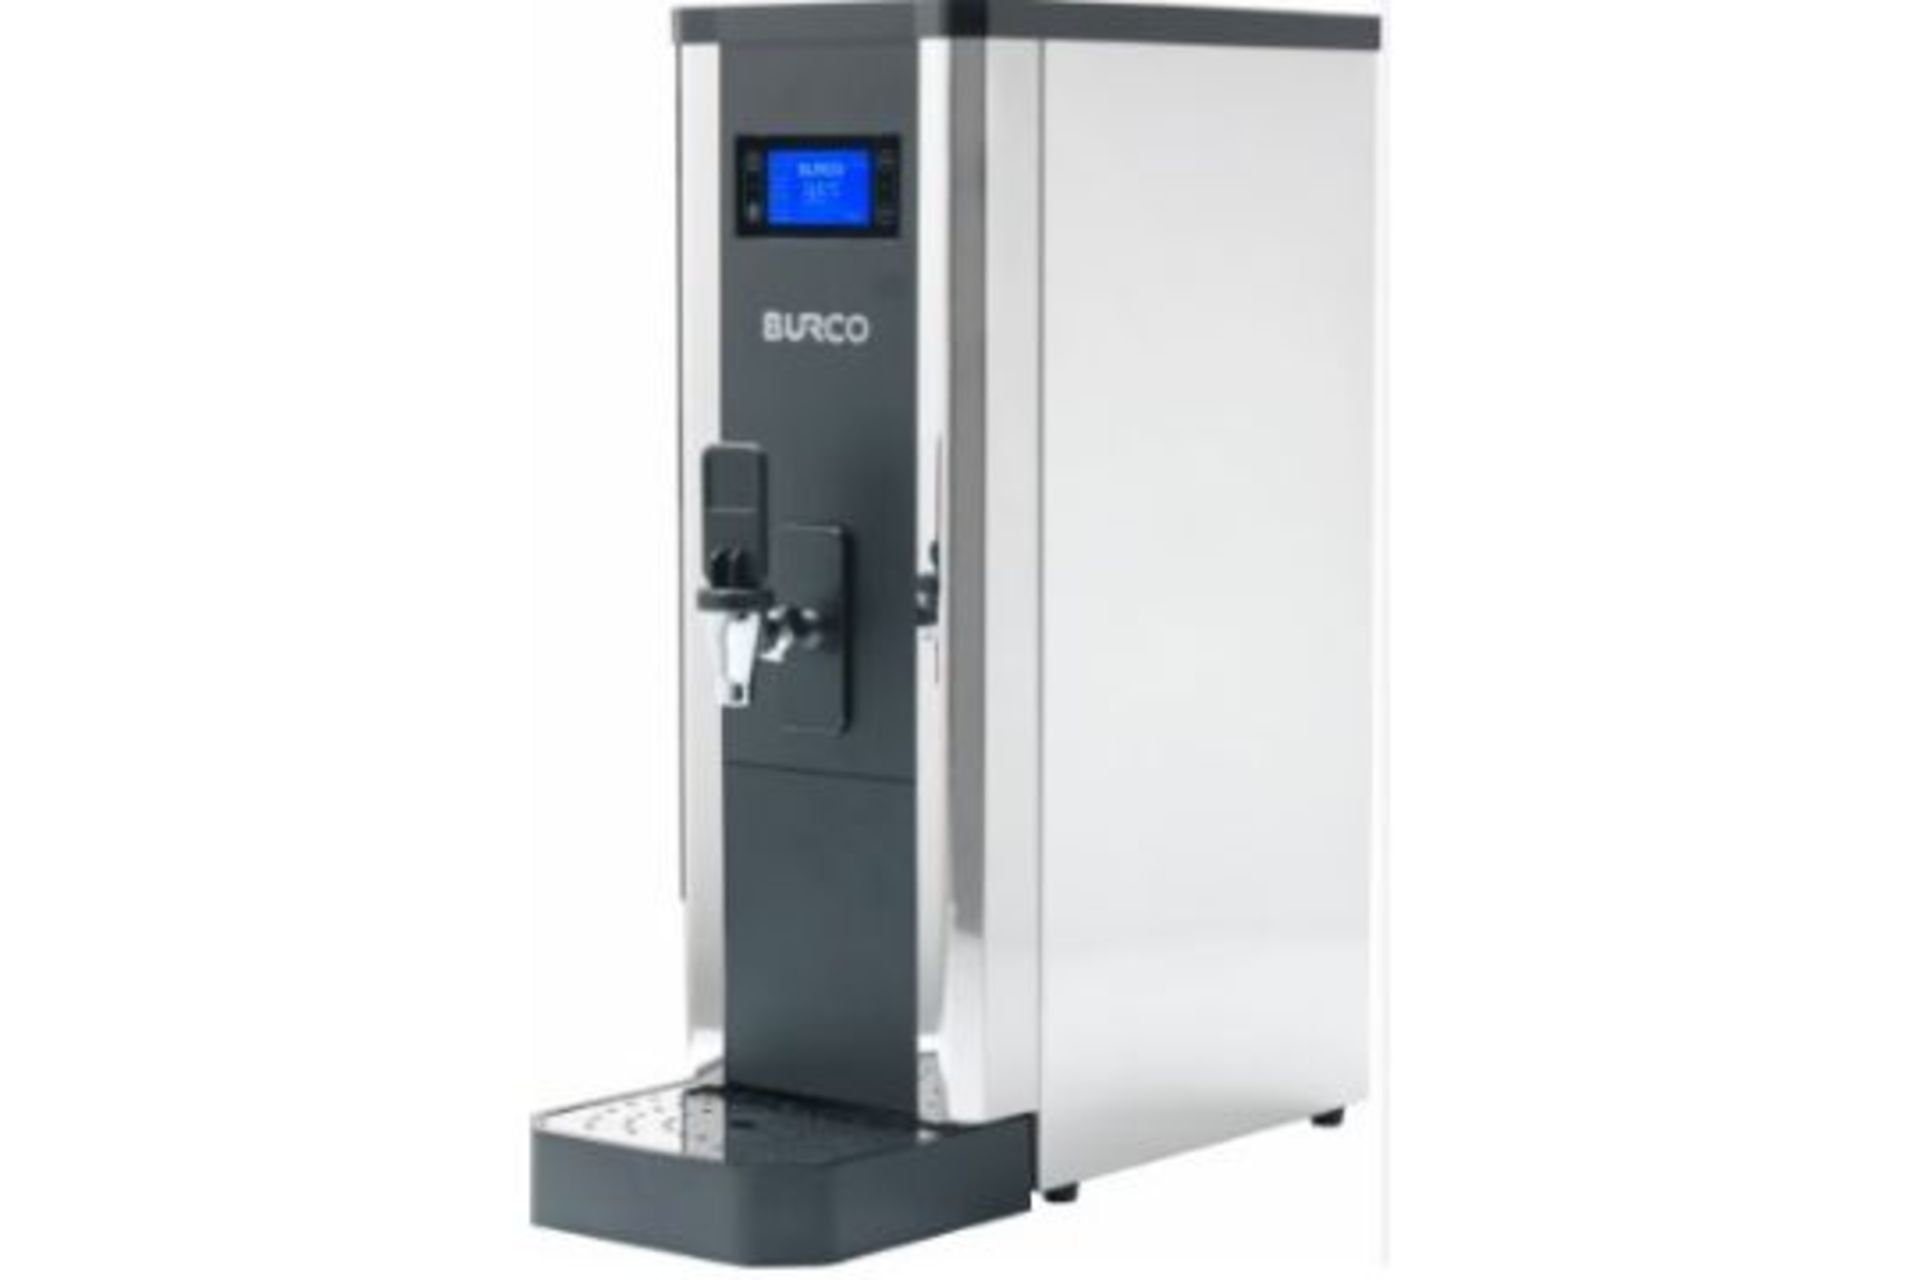 New & Boxed Burco Slimline Autofill 10L Water Boiler with Filtration (tap operated). (PALLET - Image 2 of 3